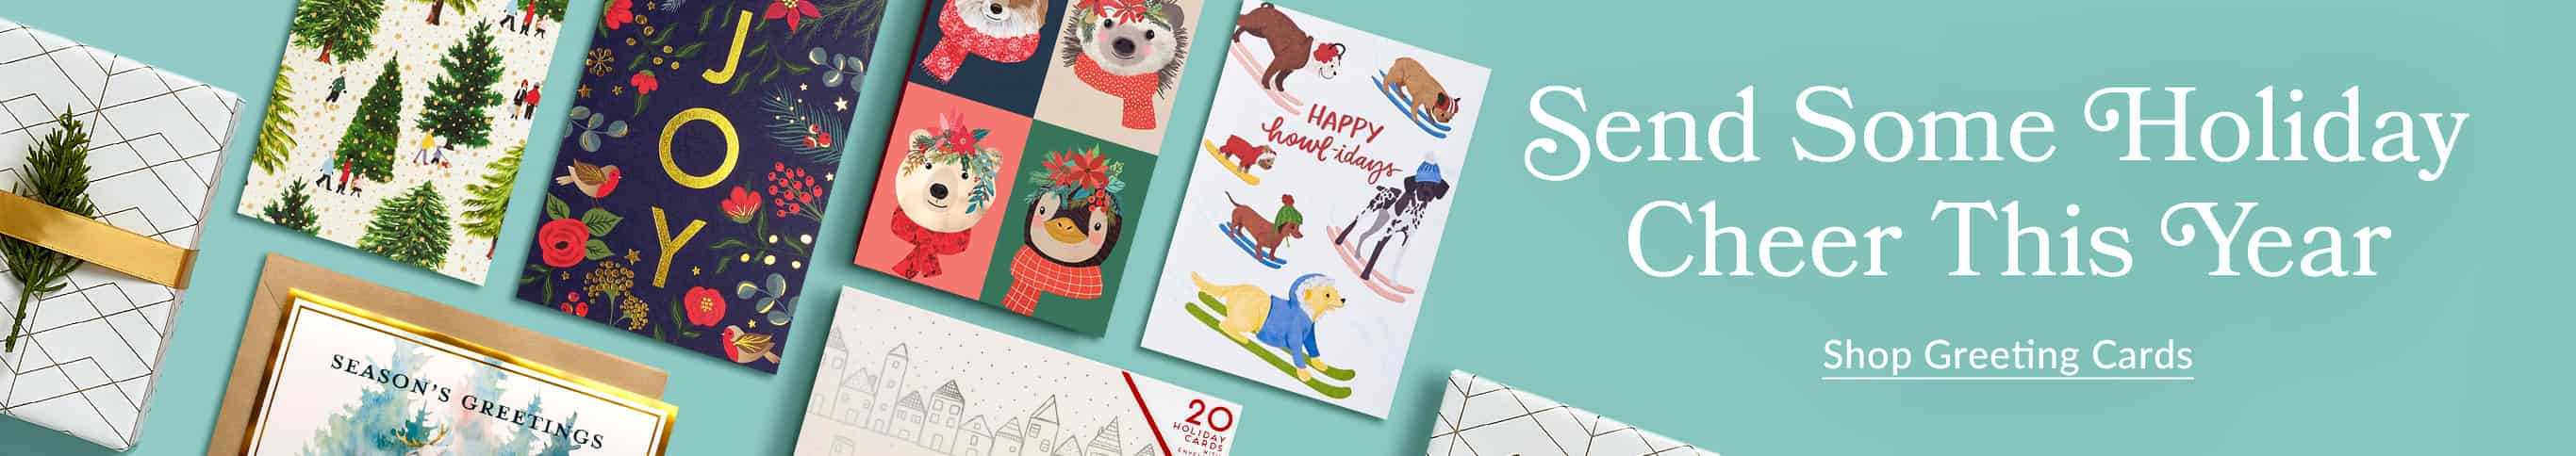 Send some holiday cheer this year! Shop Greeting Cards